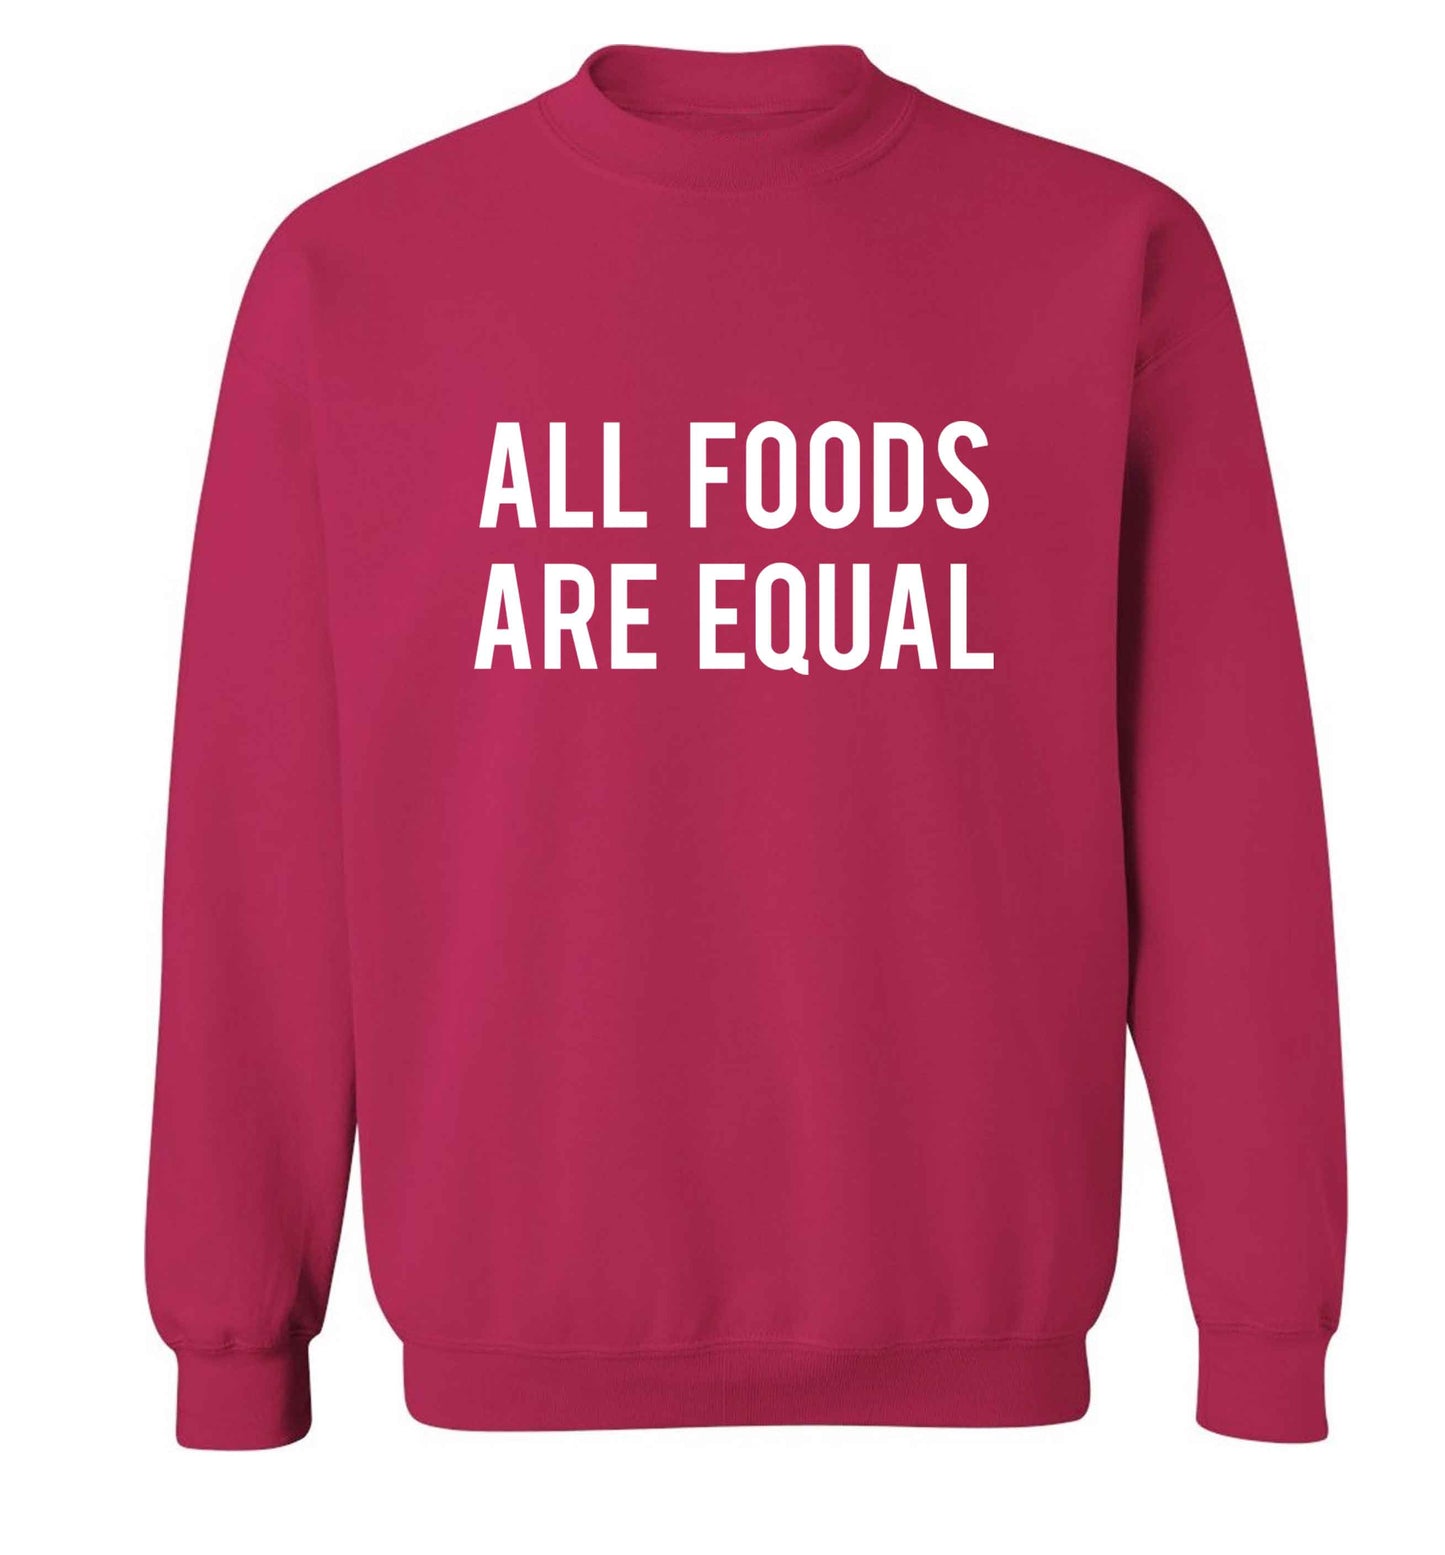 All foods are equal adult's unisex pink sweater 2XL